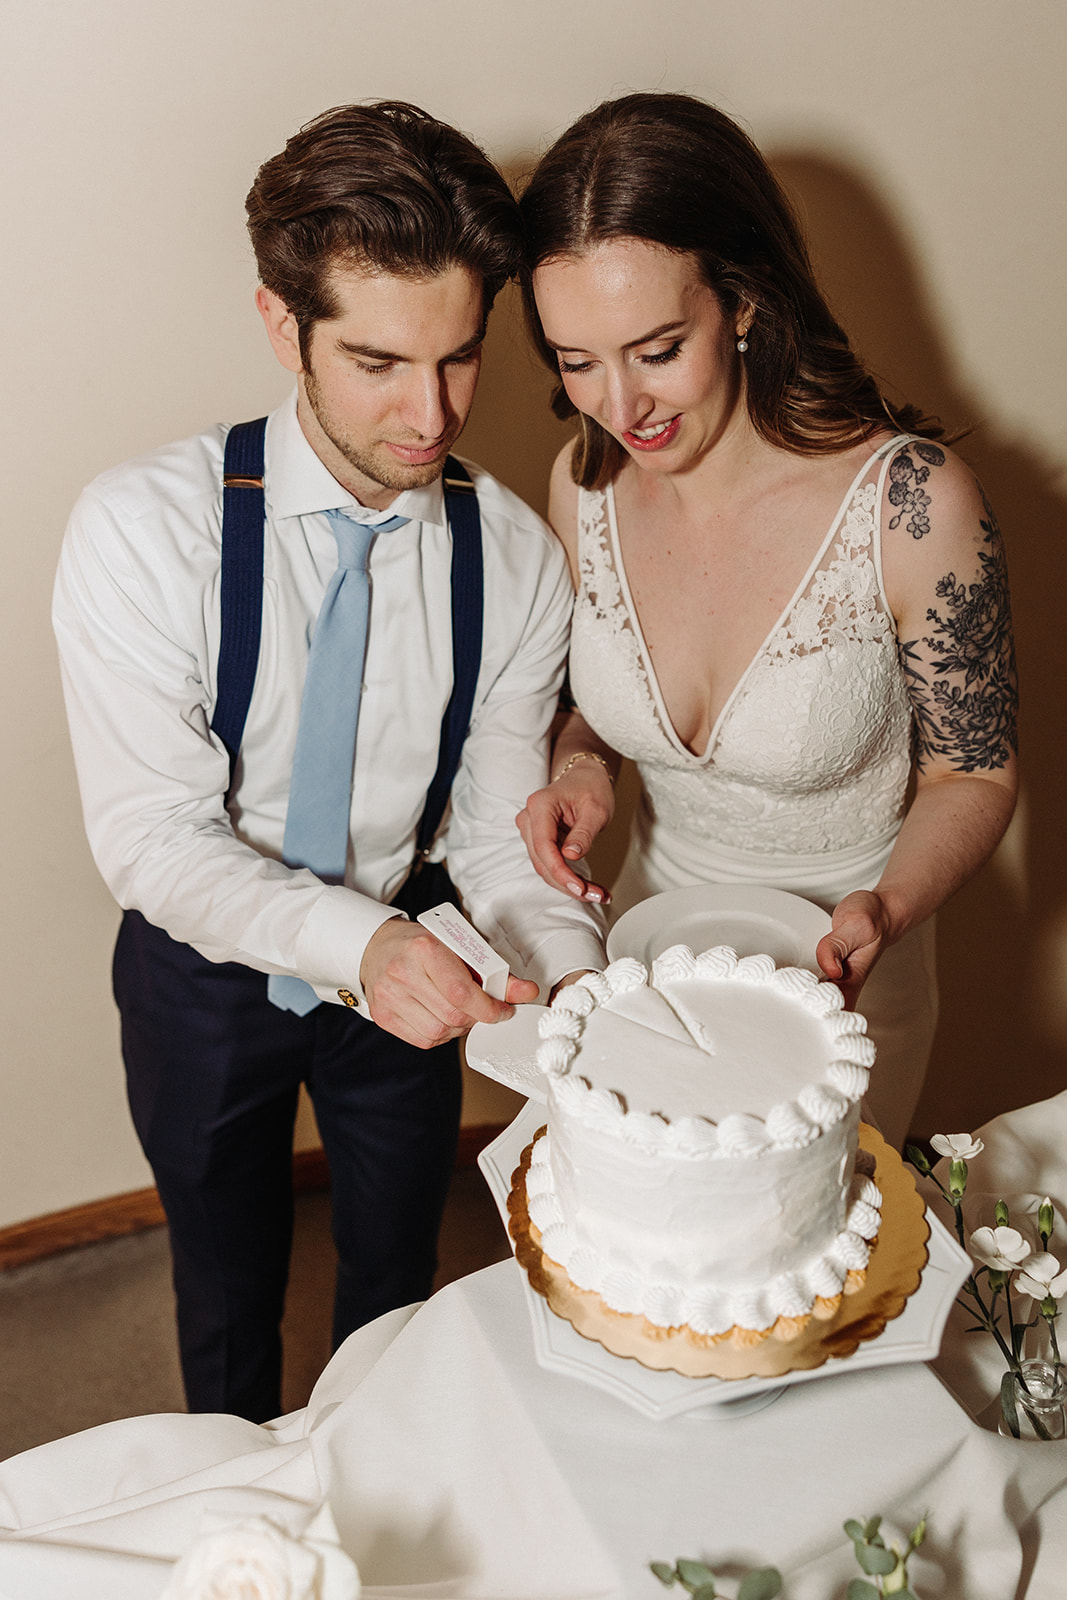 Man and woman cutting the wedding cake 